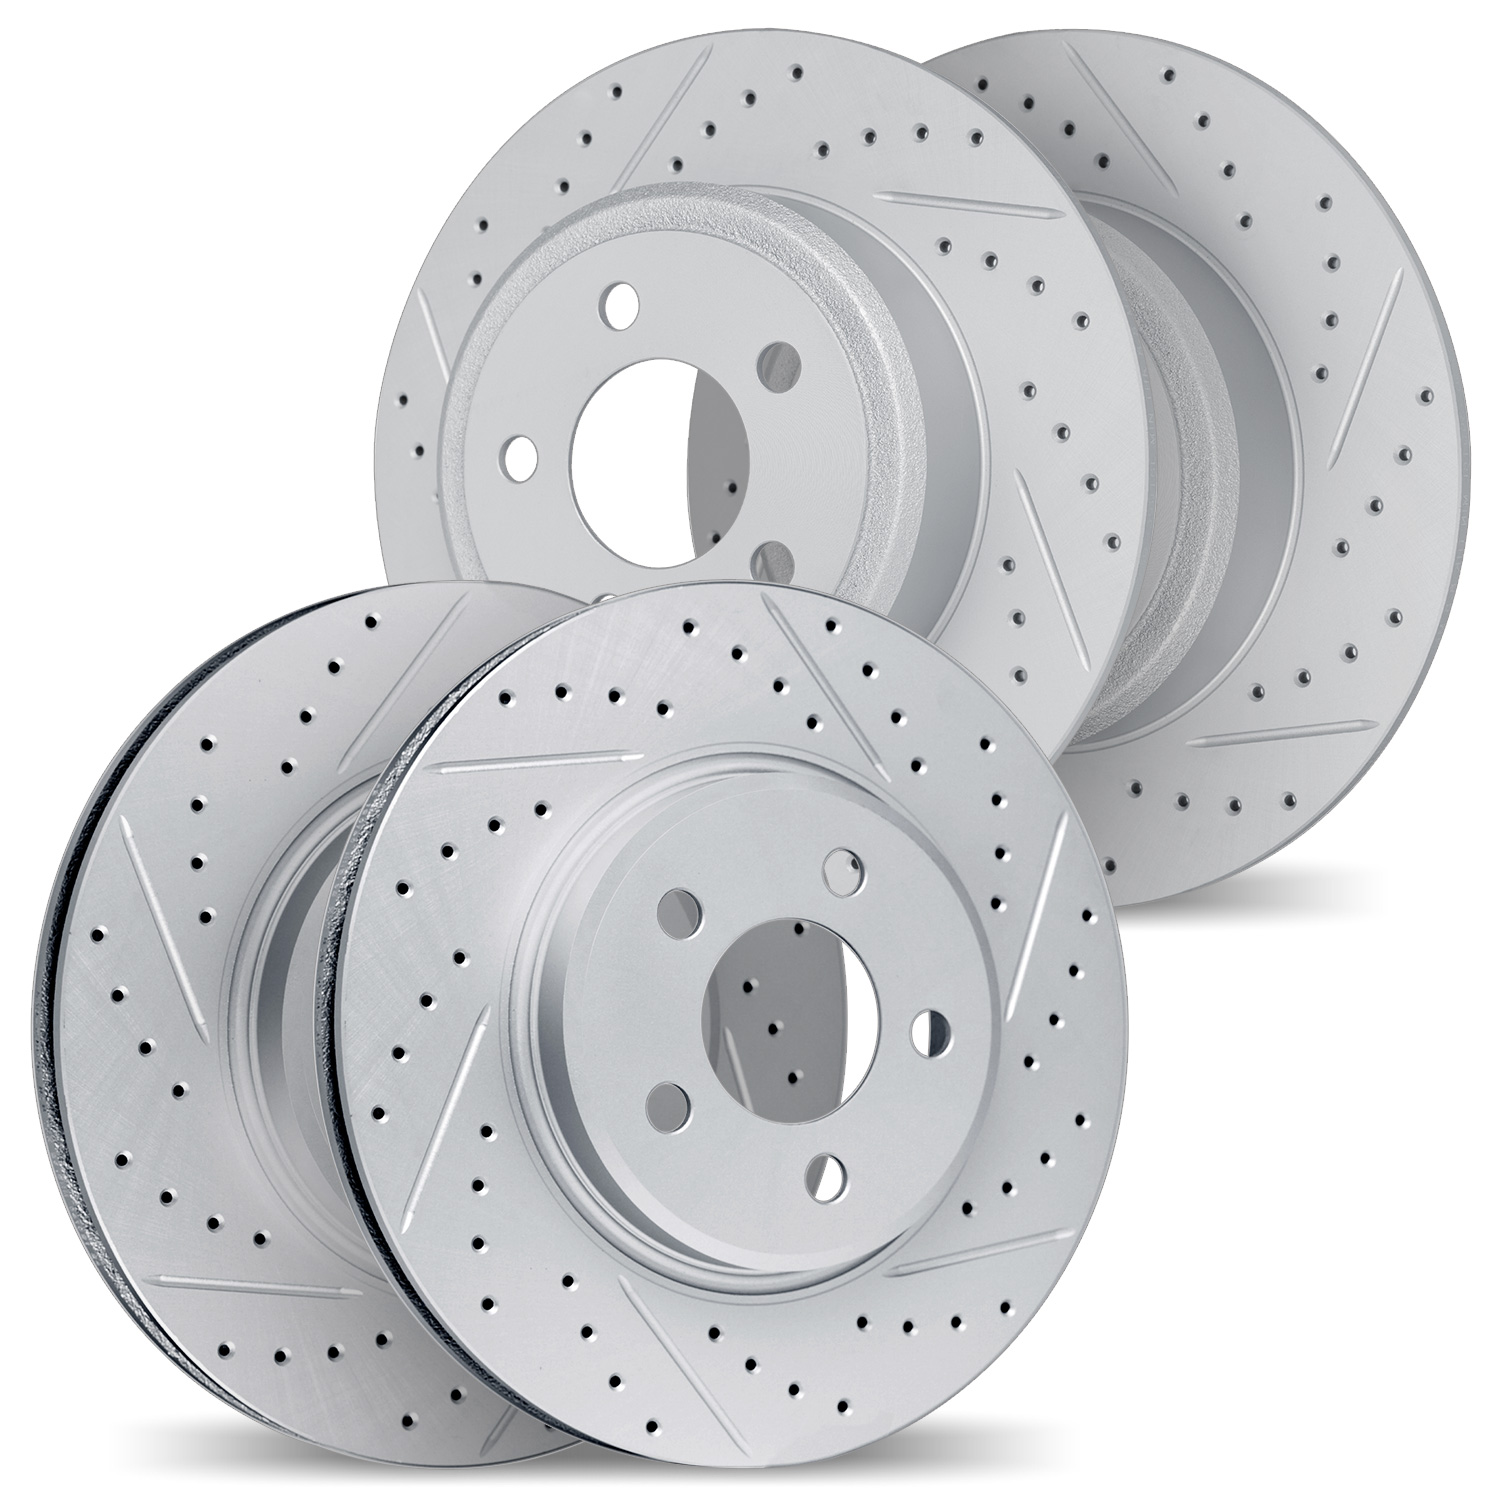 2004-63010 Geoperformance Drilled/Slotted Brake Rotors, Fits Select Mercedes-Benz, Position: Front and Rear